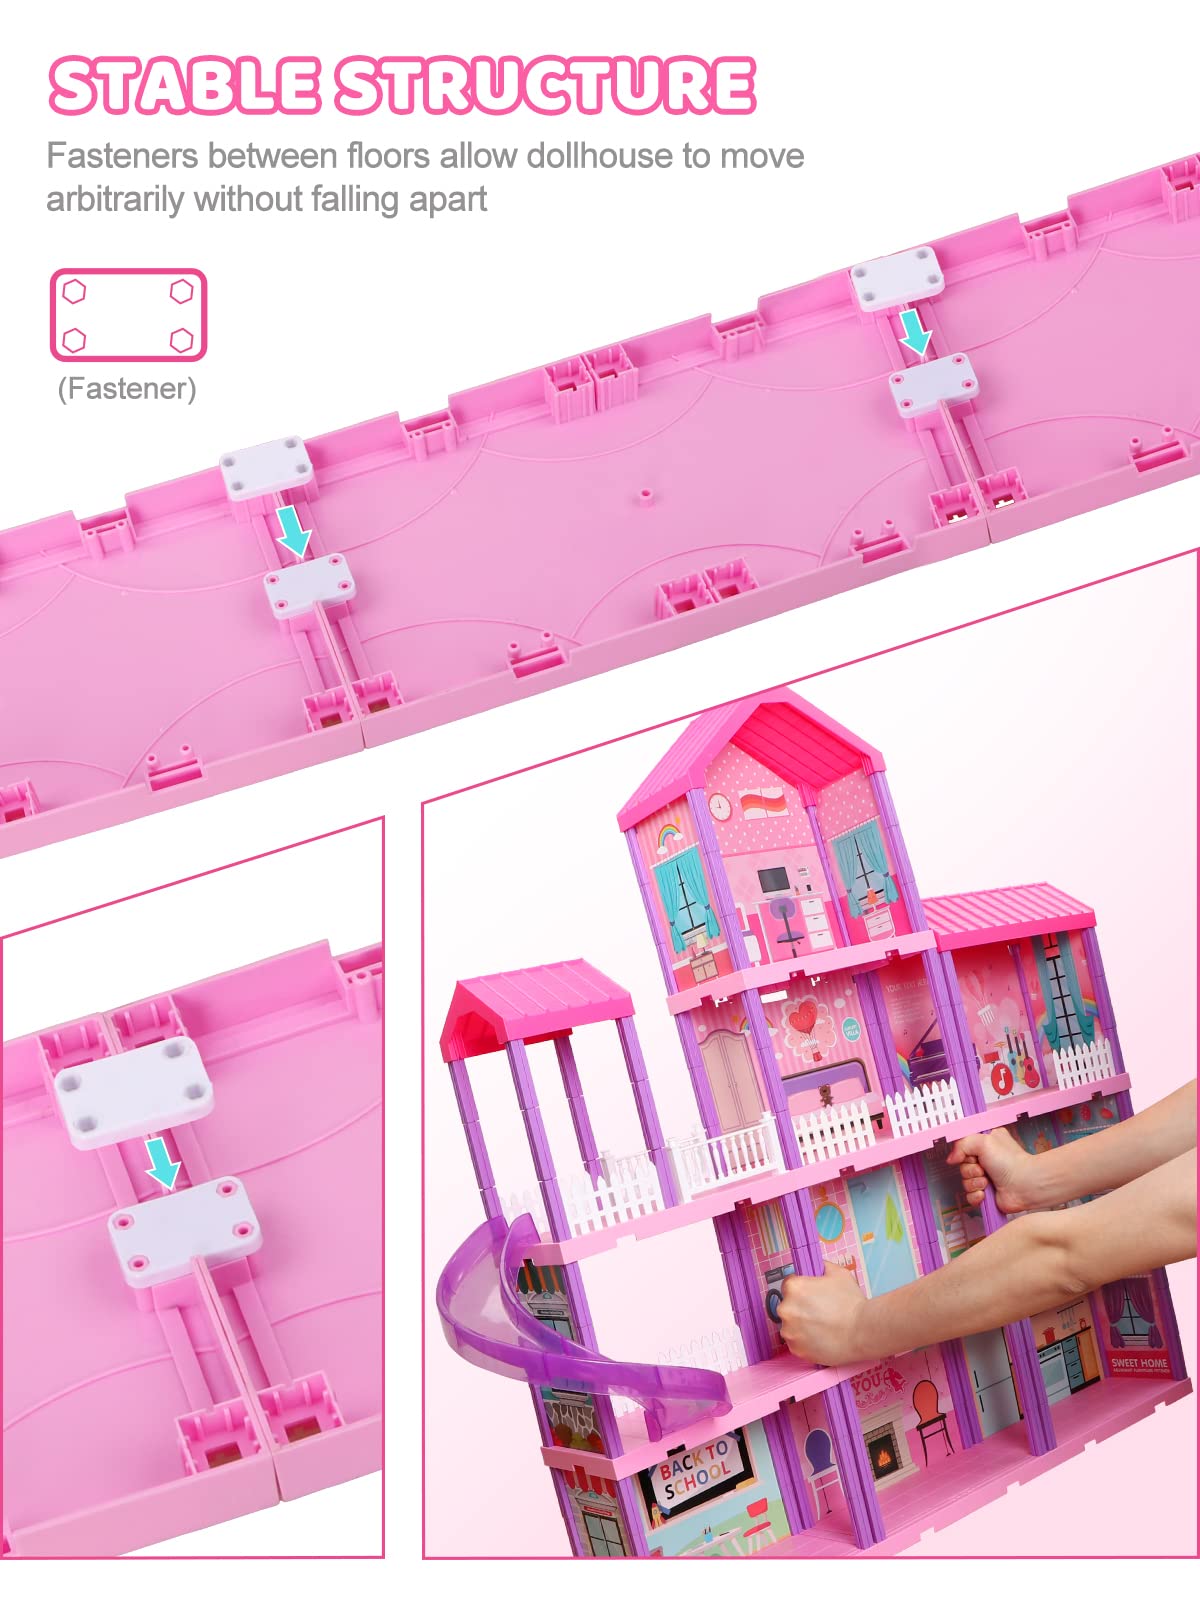 beefunni Doll House, Dollhouse w/Furniture - Pink/Purple Girl Toys | 4 Stories, 11 Rooms w/ 2 Princesses, Slide, Lights, Gifts for 3 4 5 6 7 8 9 10 Year Old Girls Toys(27.6